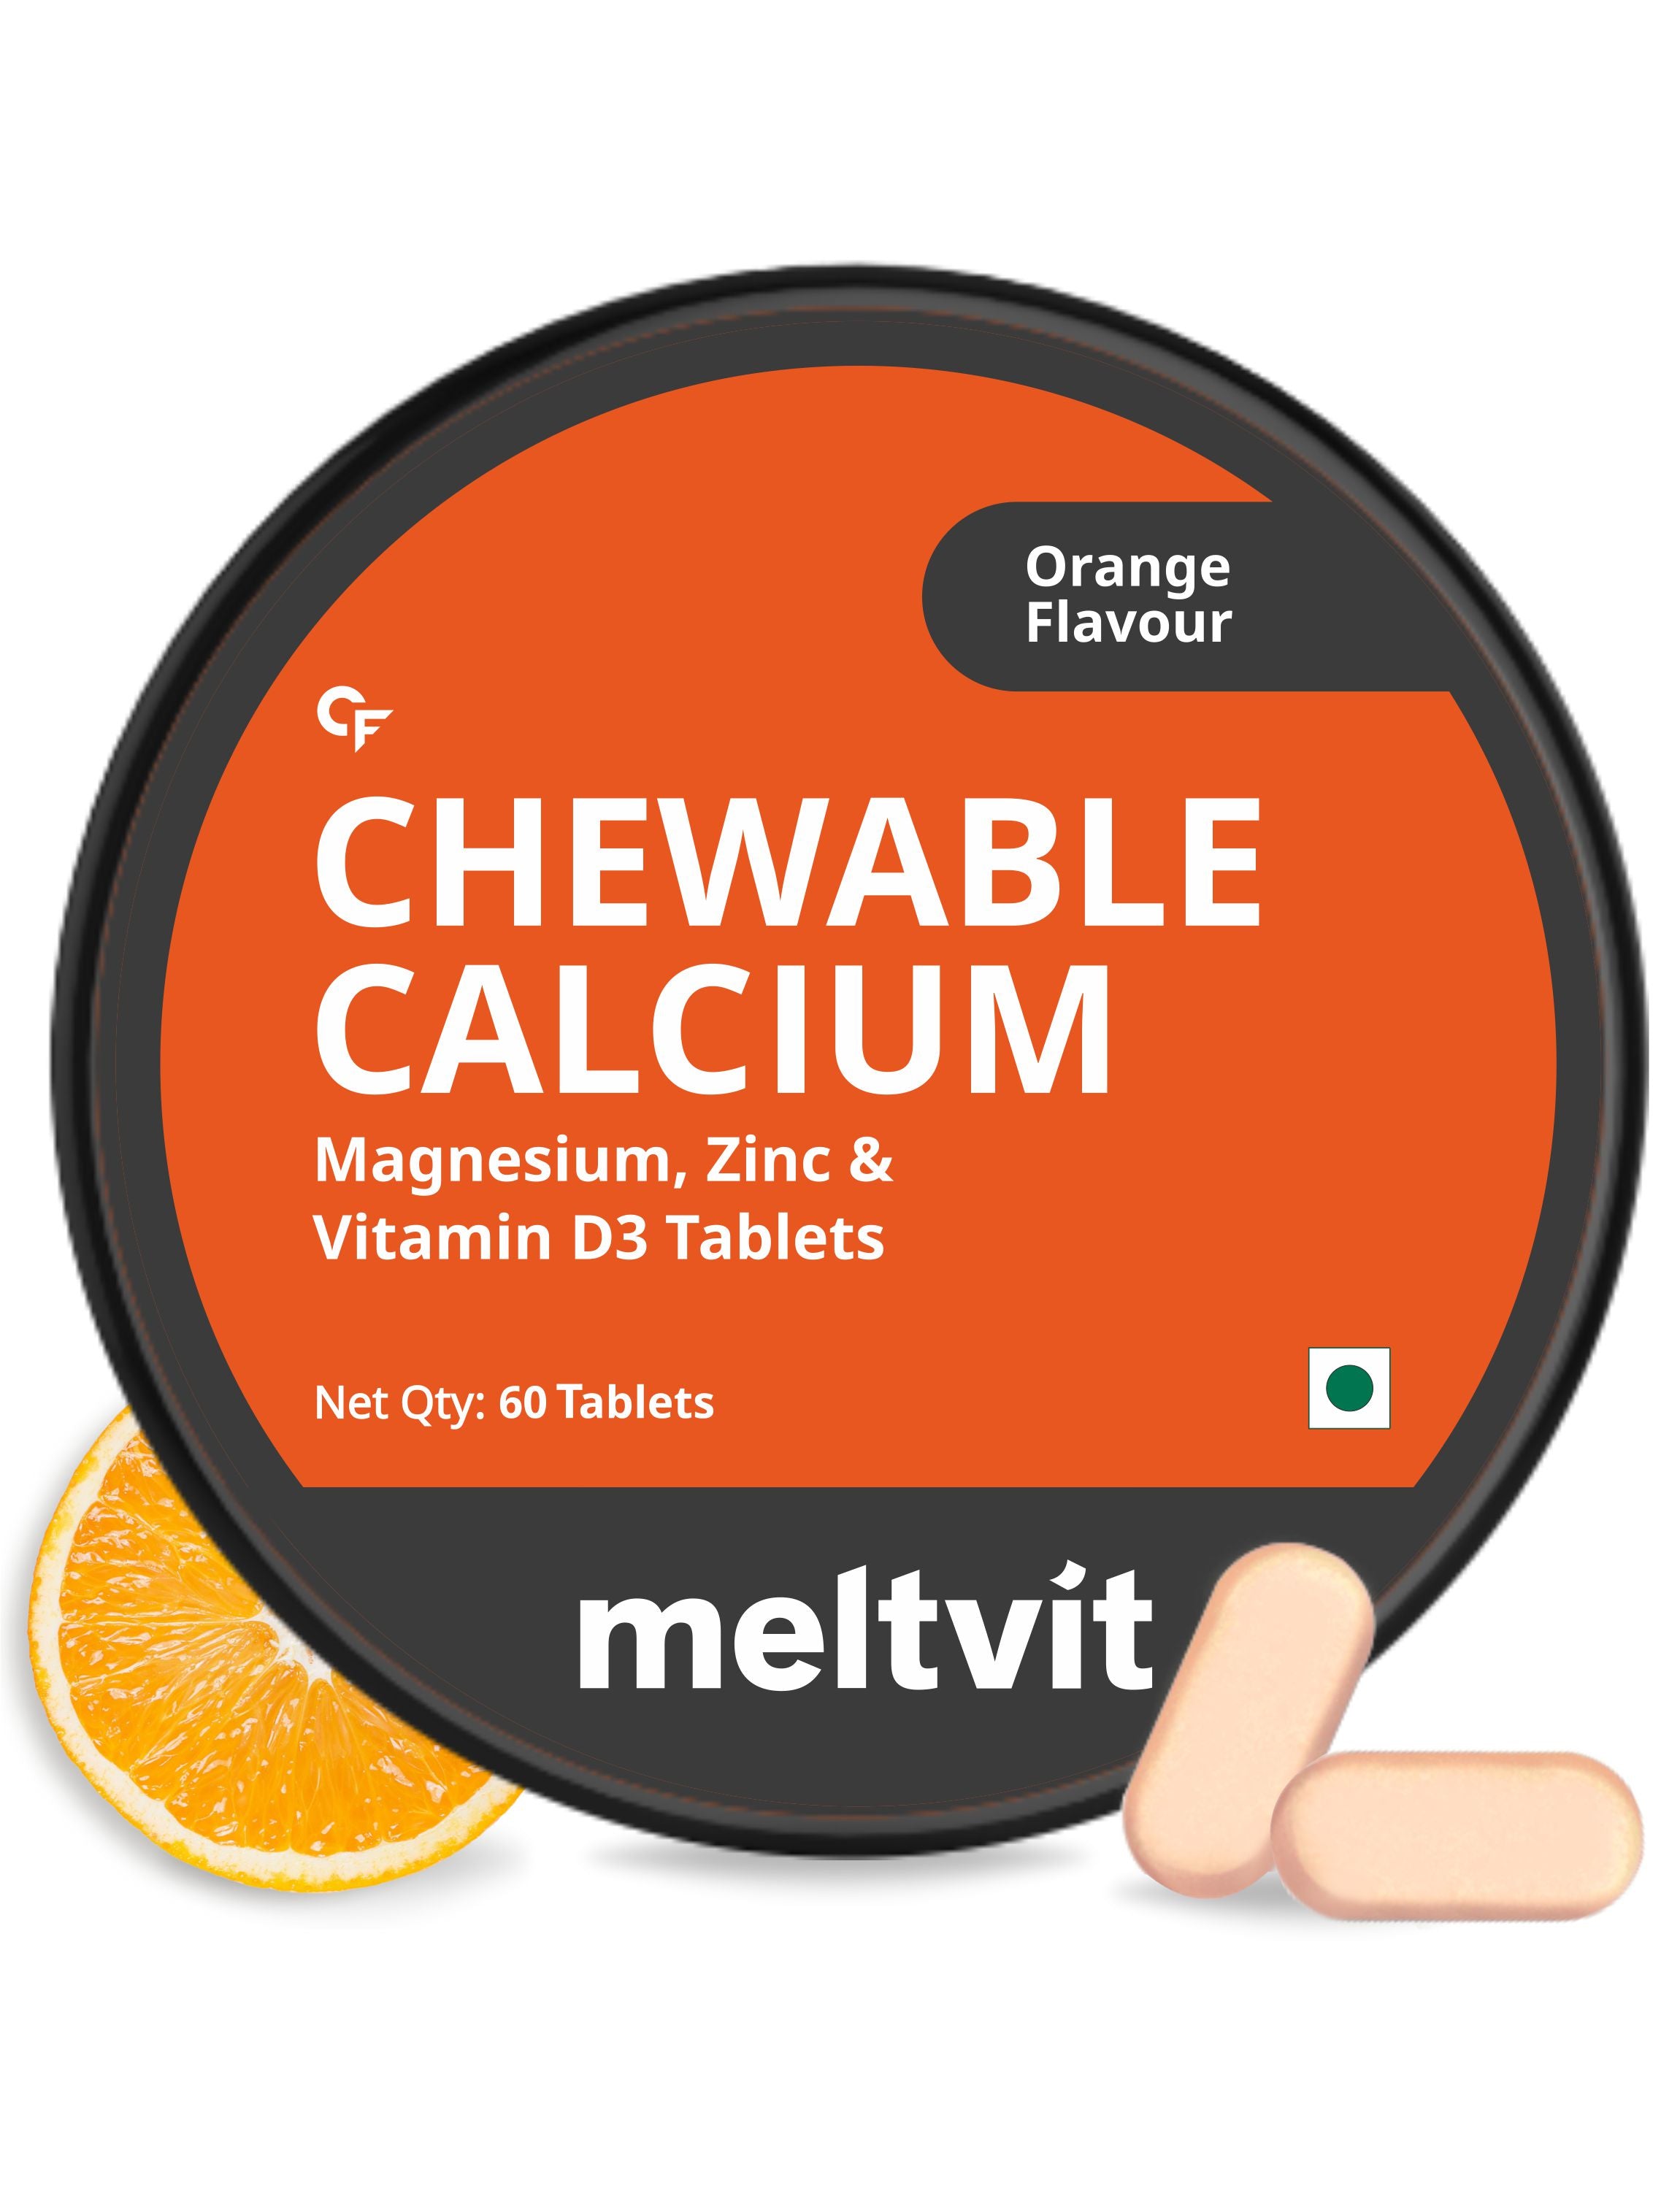 Mycf Meltvit Chewable Calcium Tablets 1000mg with Vitamin D3, Magnesium & Zinc Tablets | Water Soluble Calcium Citrate Malate 1000mg with Stabilised D3